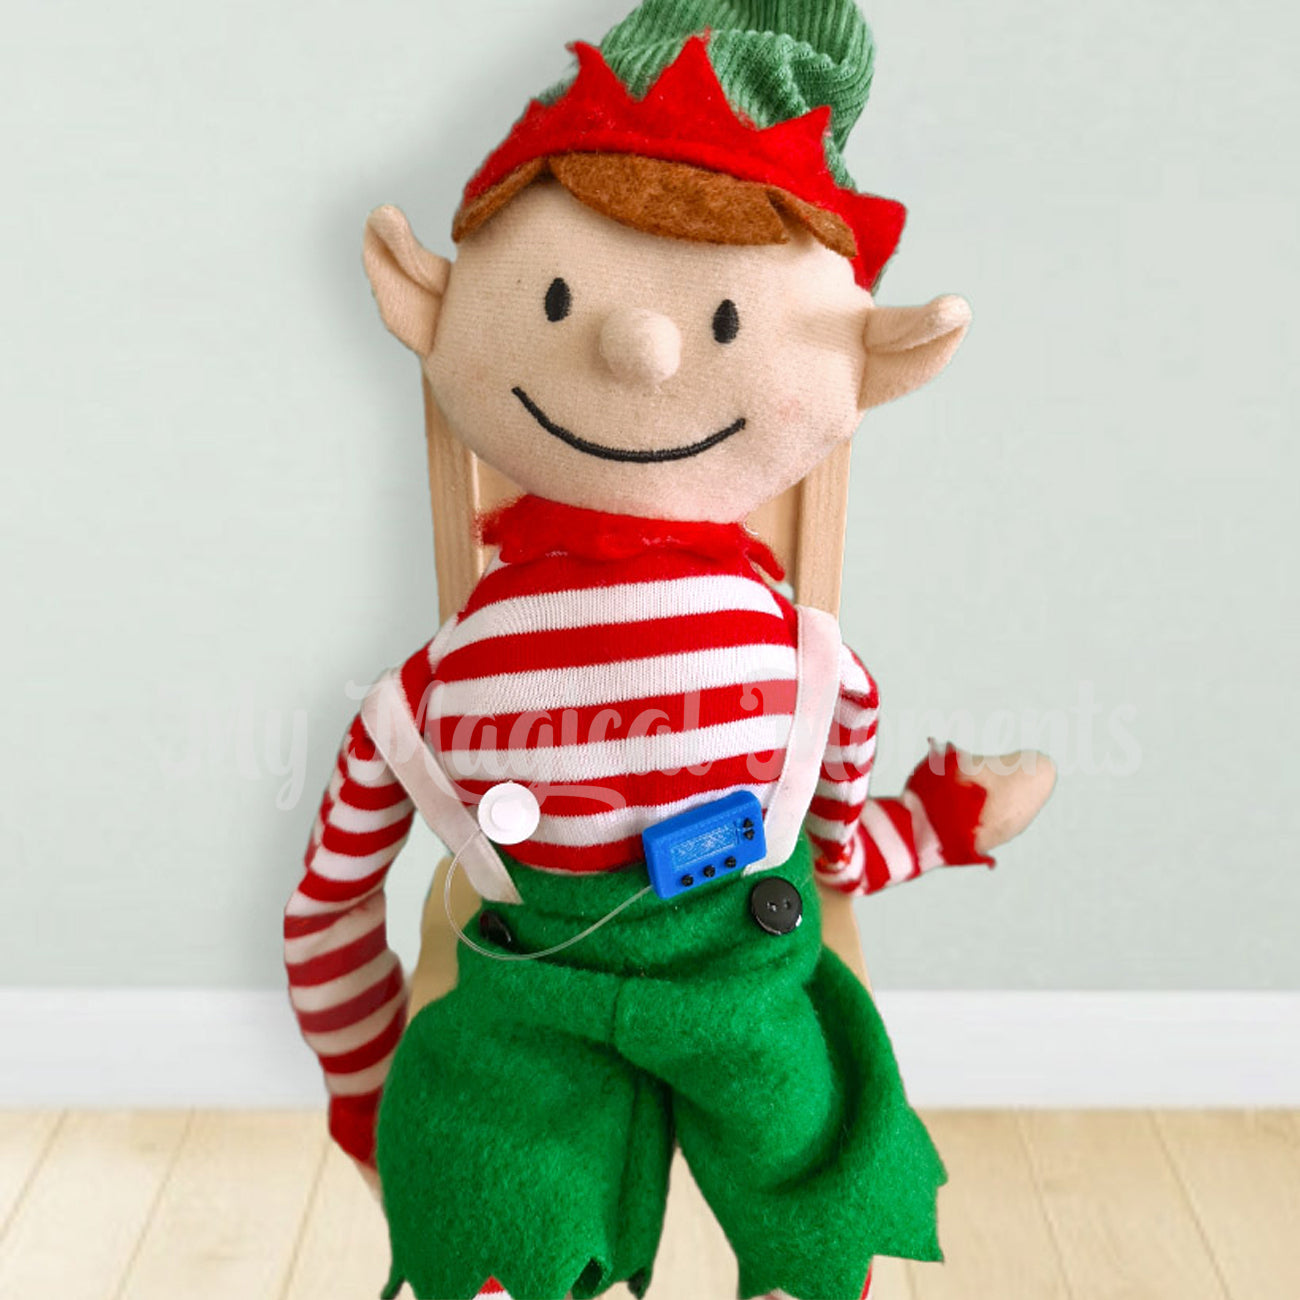 Elf for Christmas with a mini diabetic insulin pump